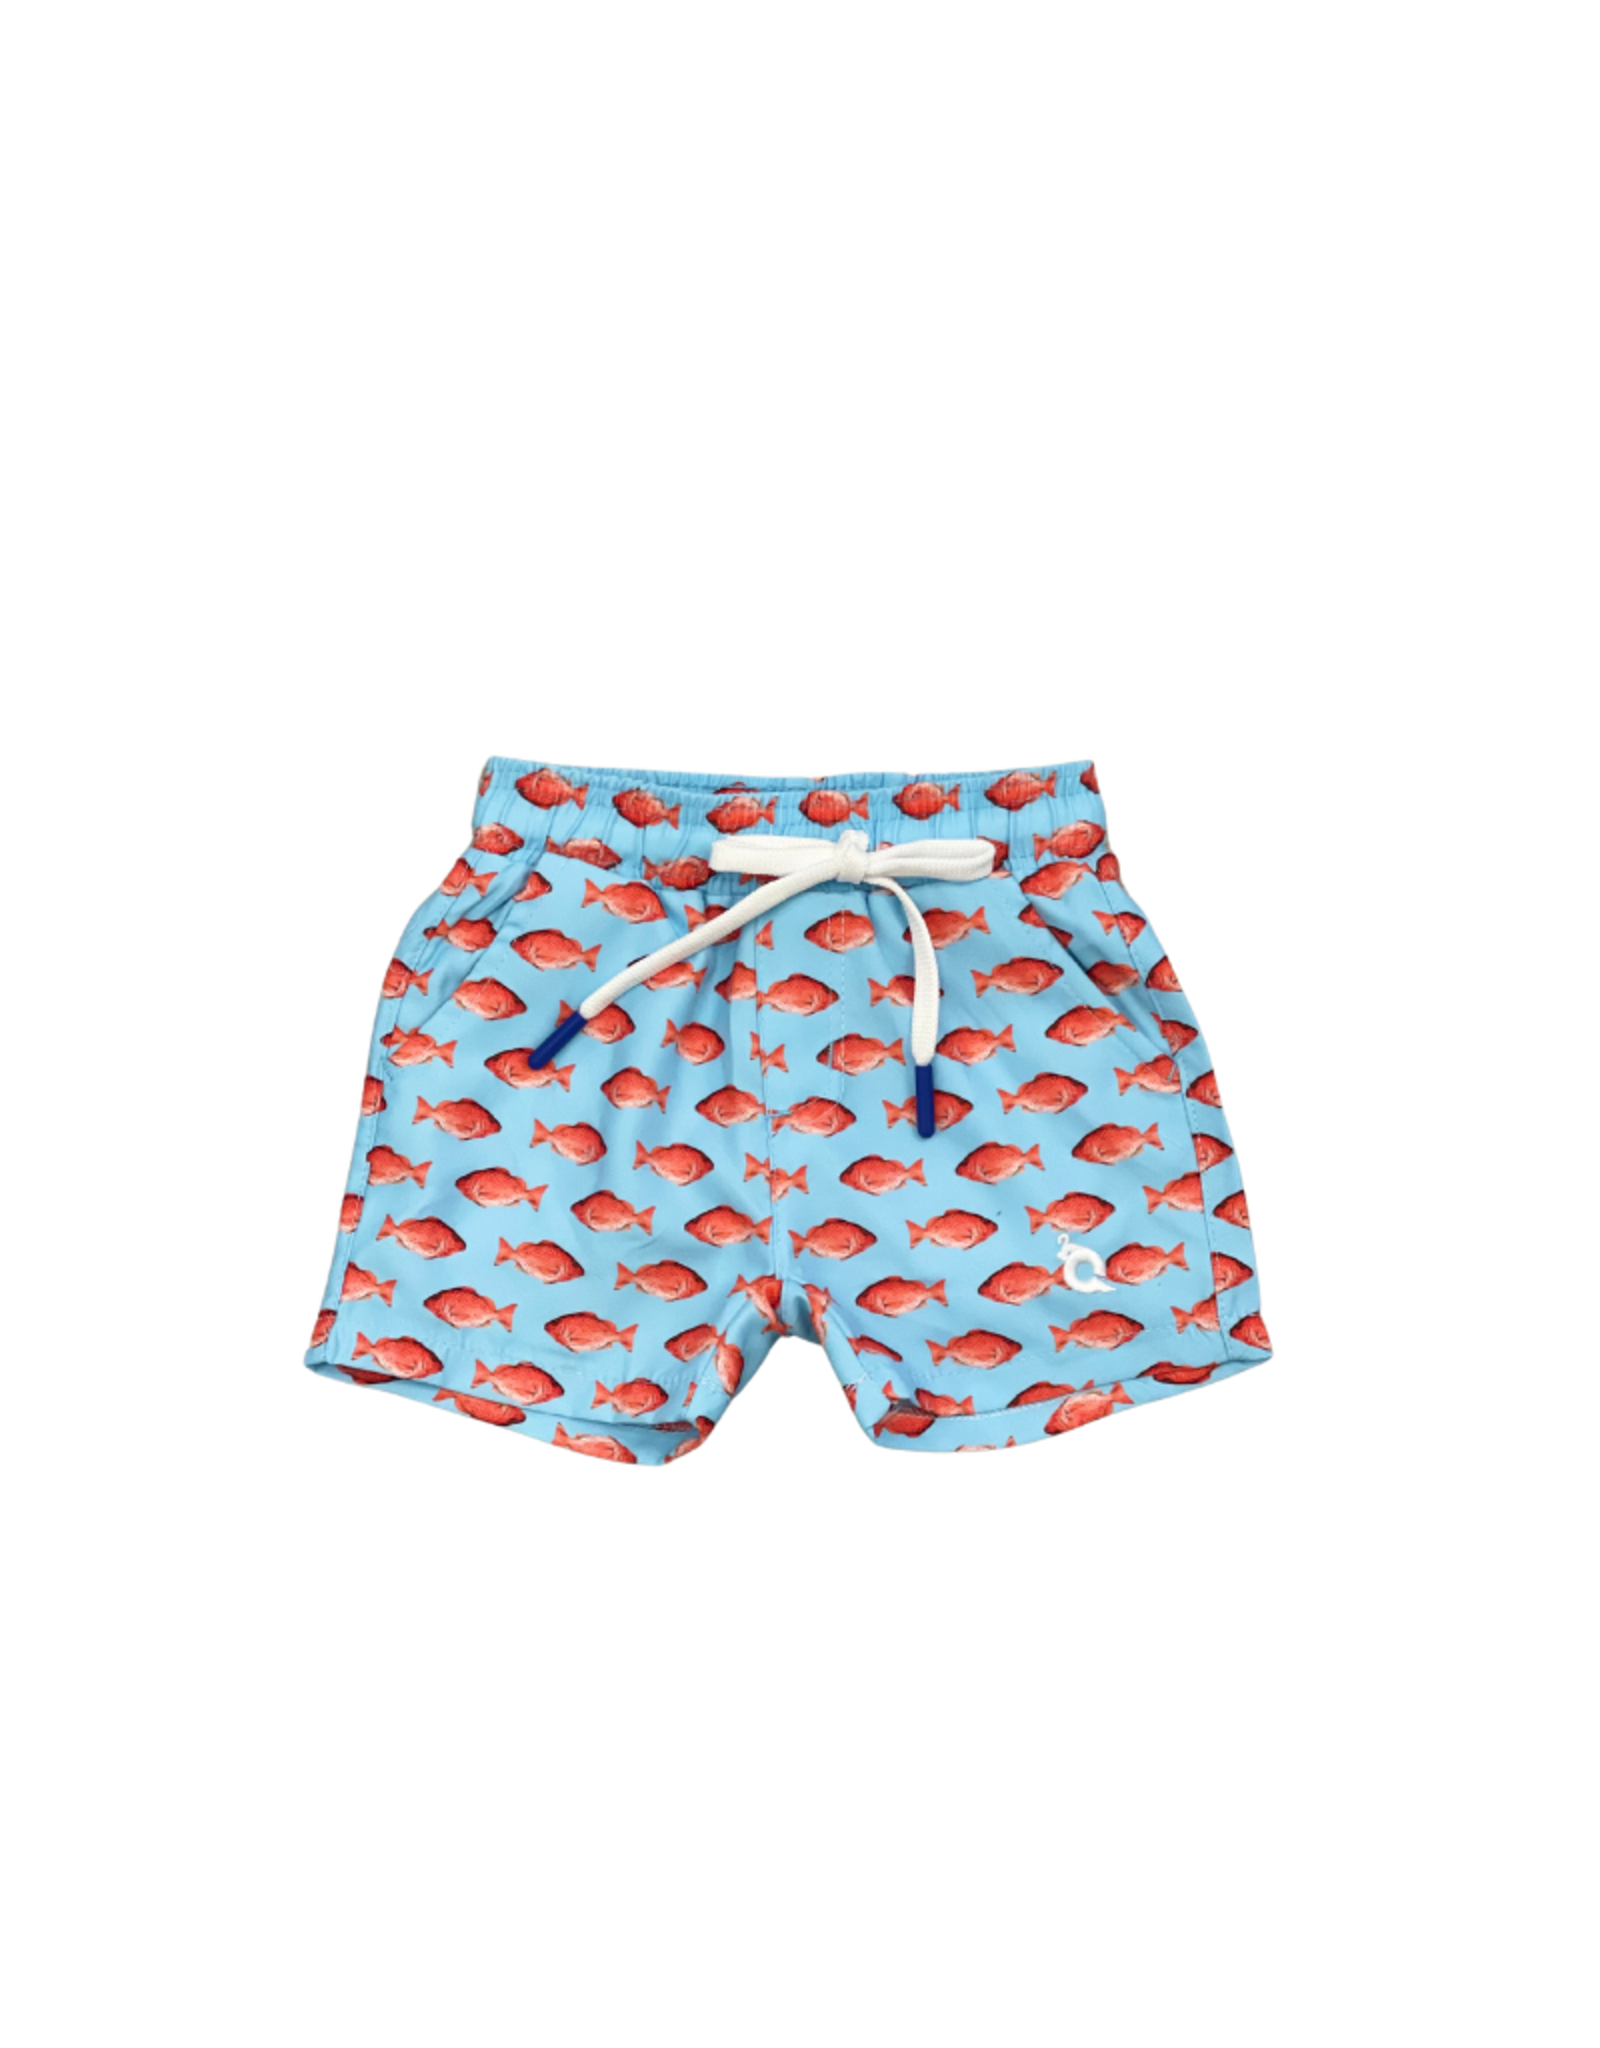 BlueQuail Clothing Co. Red Snapper Swim Trunks